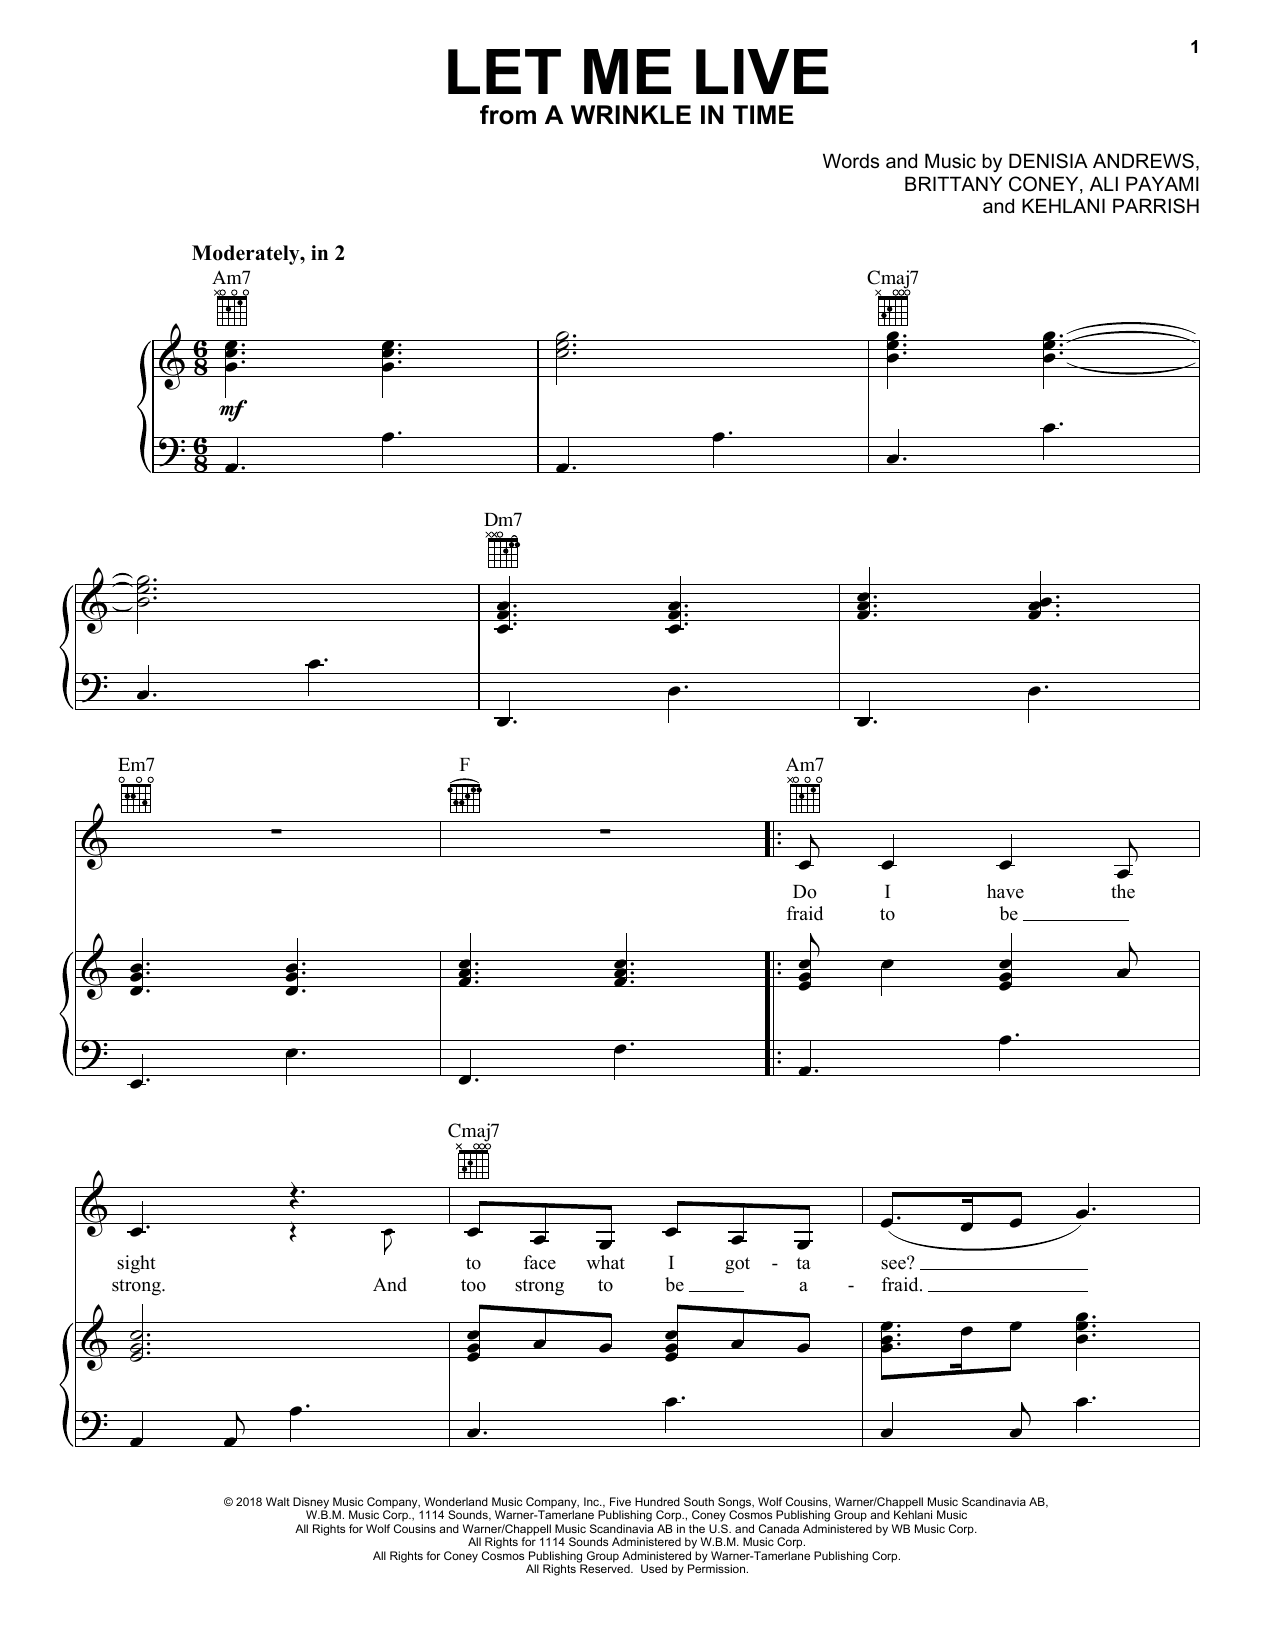 Download Ali Payami Let Me Live (from A Wrinkle In Time) Sheet Music